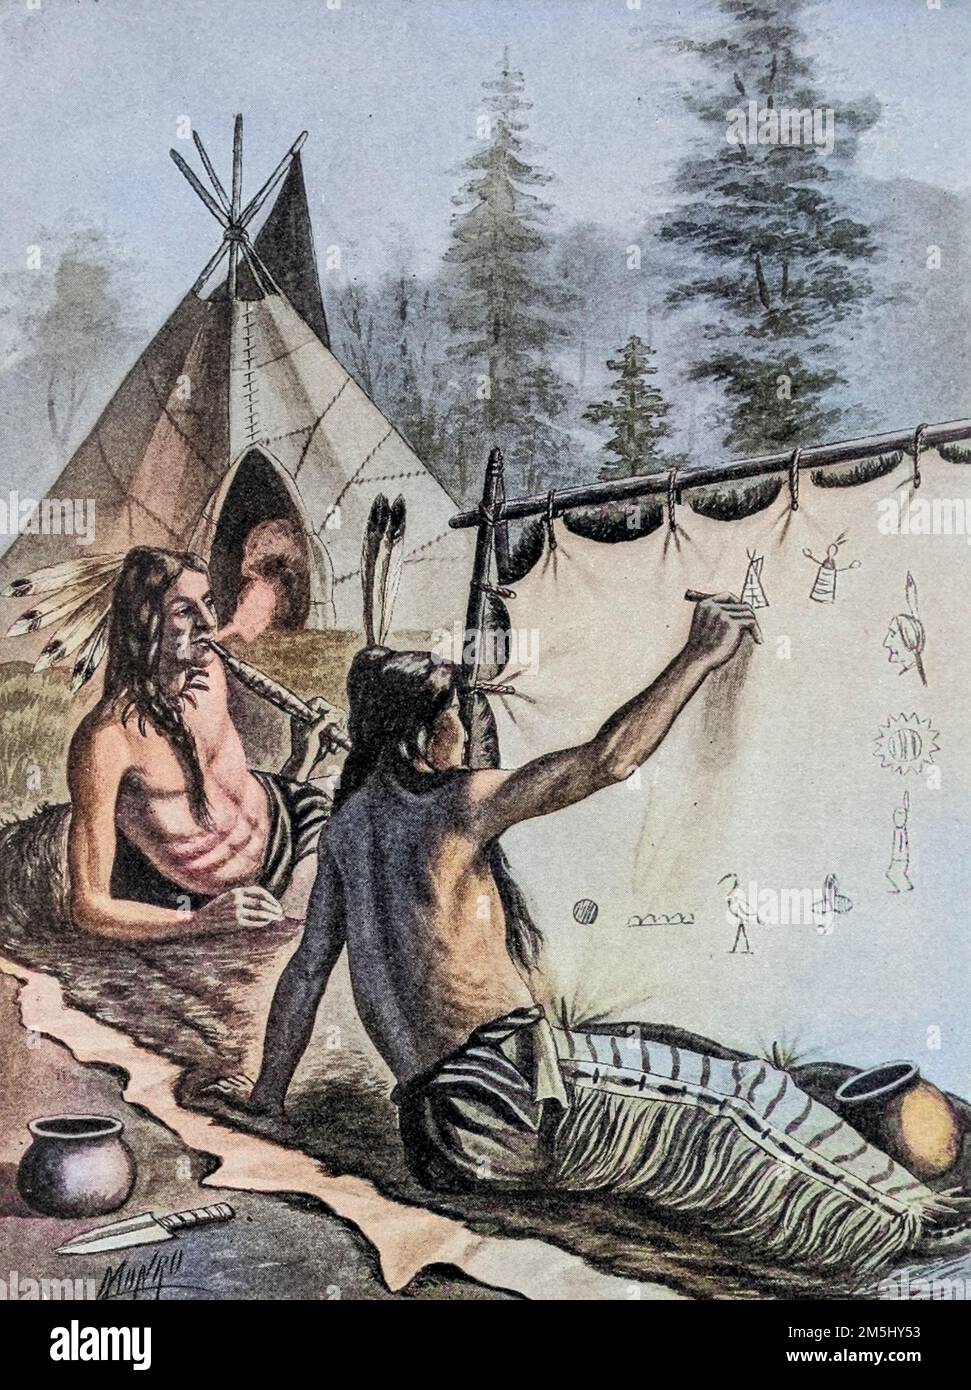 Thus it was that Hiawatha, in his Wisdom, Taught the People illustrated by Ella Booher, From the book Hiawatha the Indian from Longfellow's Song of Hiawatha by Henry Wadsworth Longfellow, 1807-1882; Stock Photo